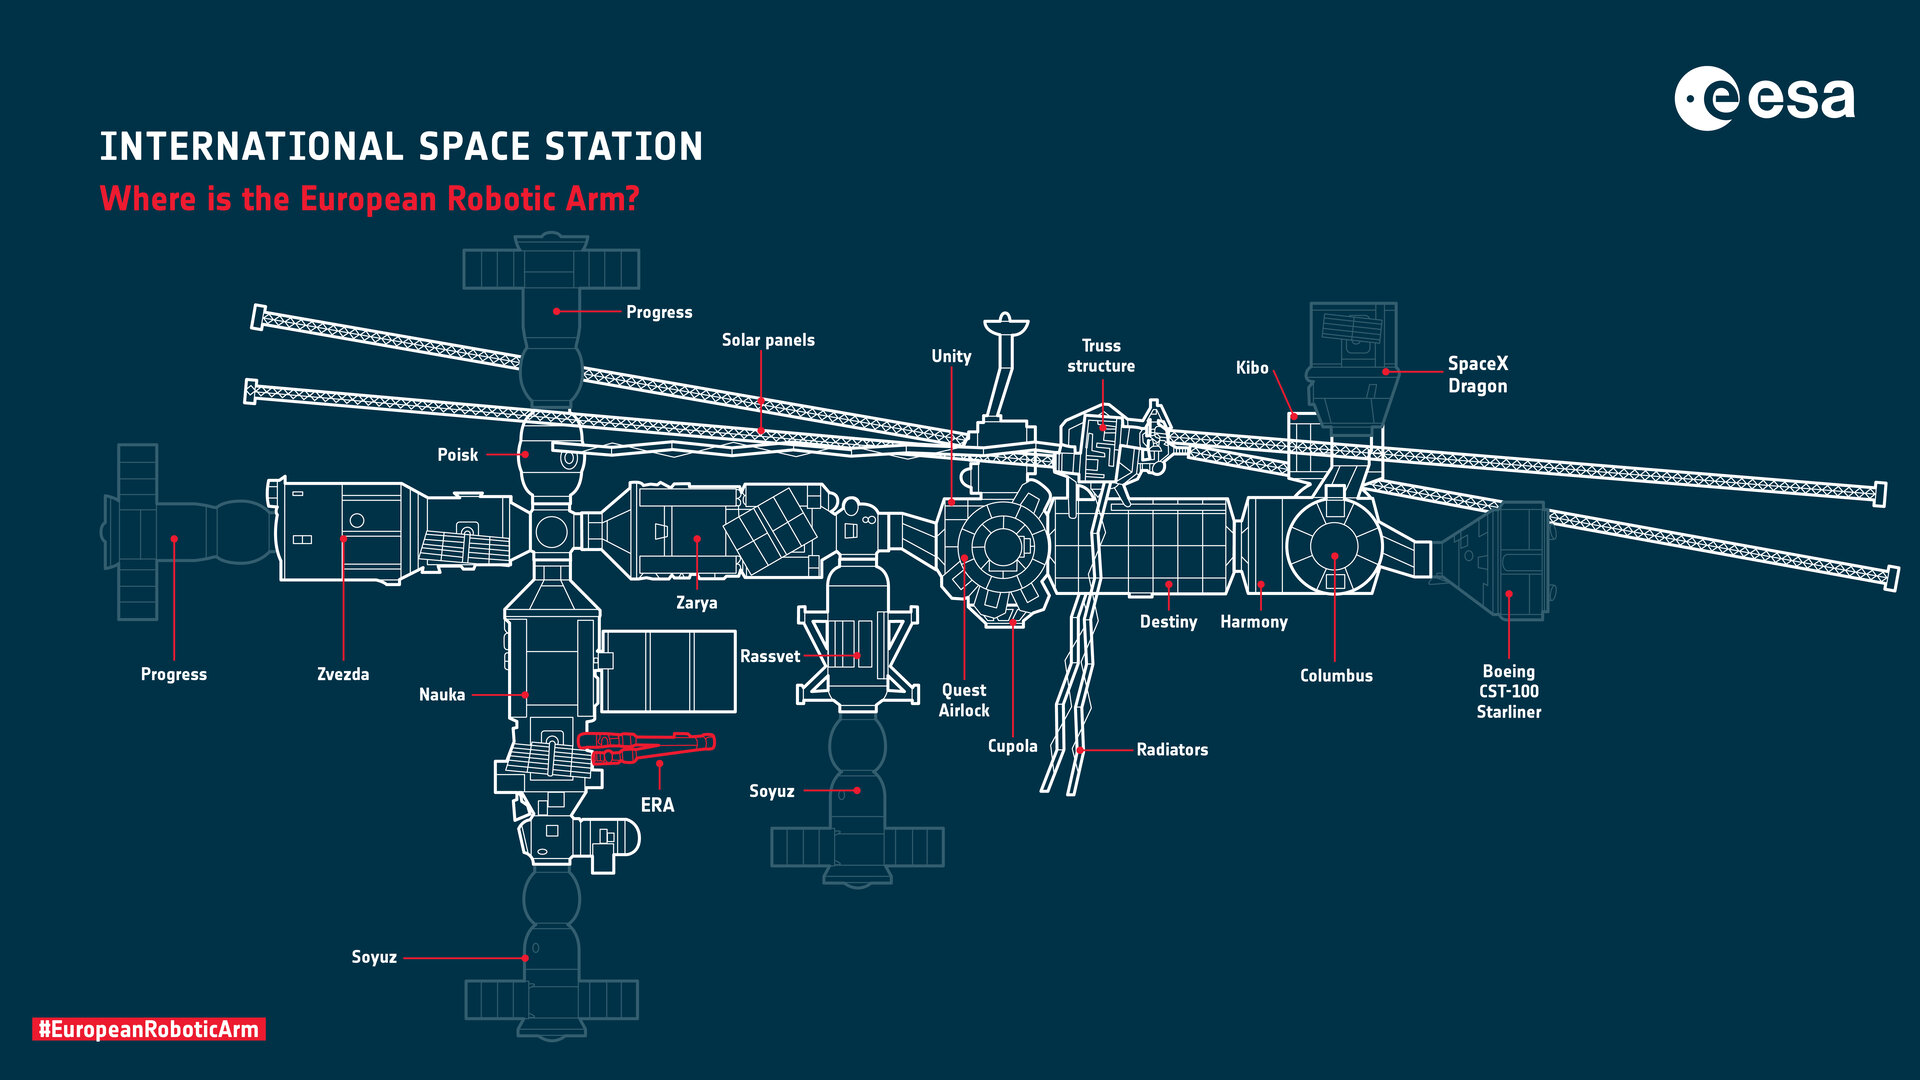 A diagram of the European Robotic Arm on the International Space Station